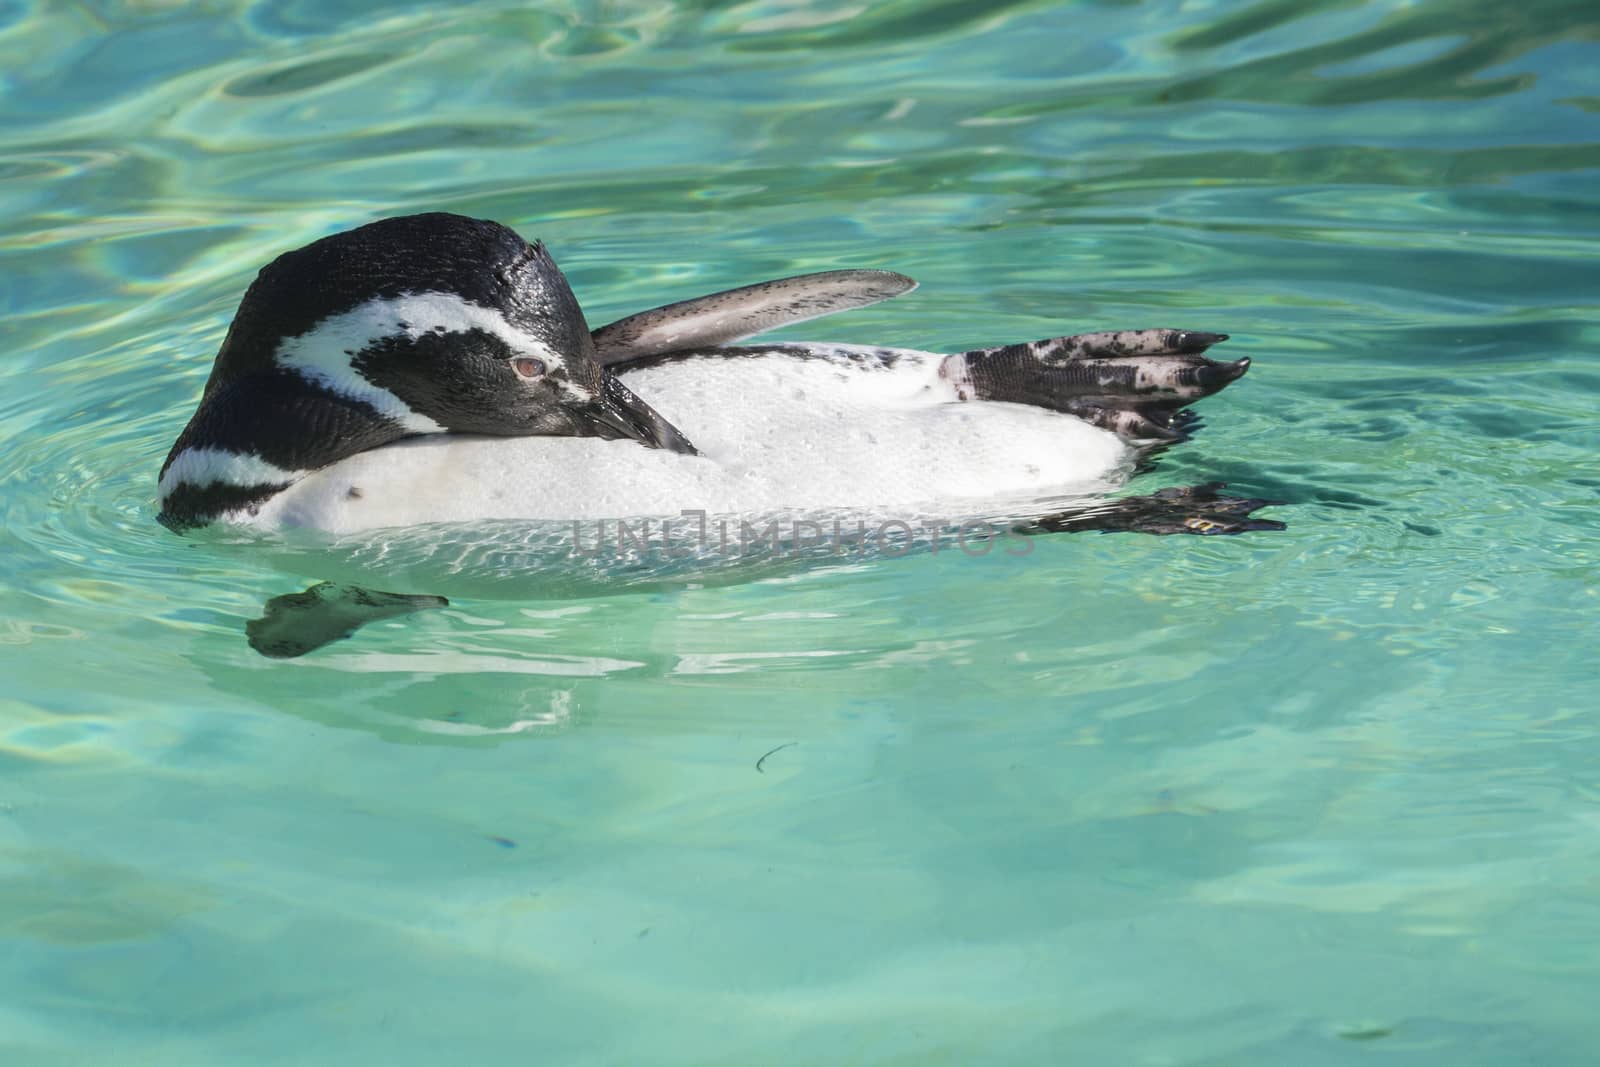 Penguin having a scratch in the water